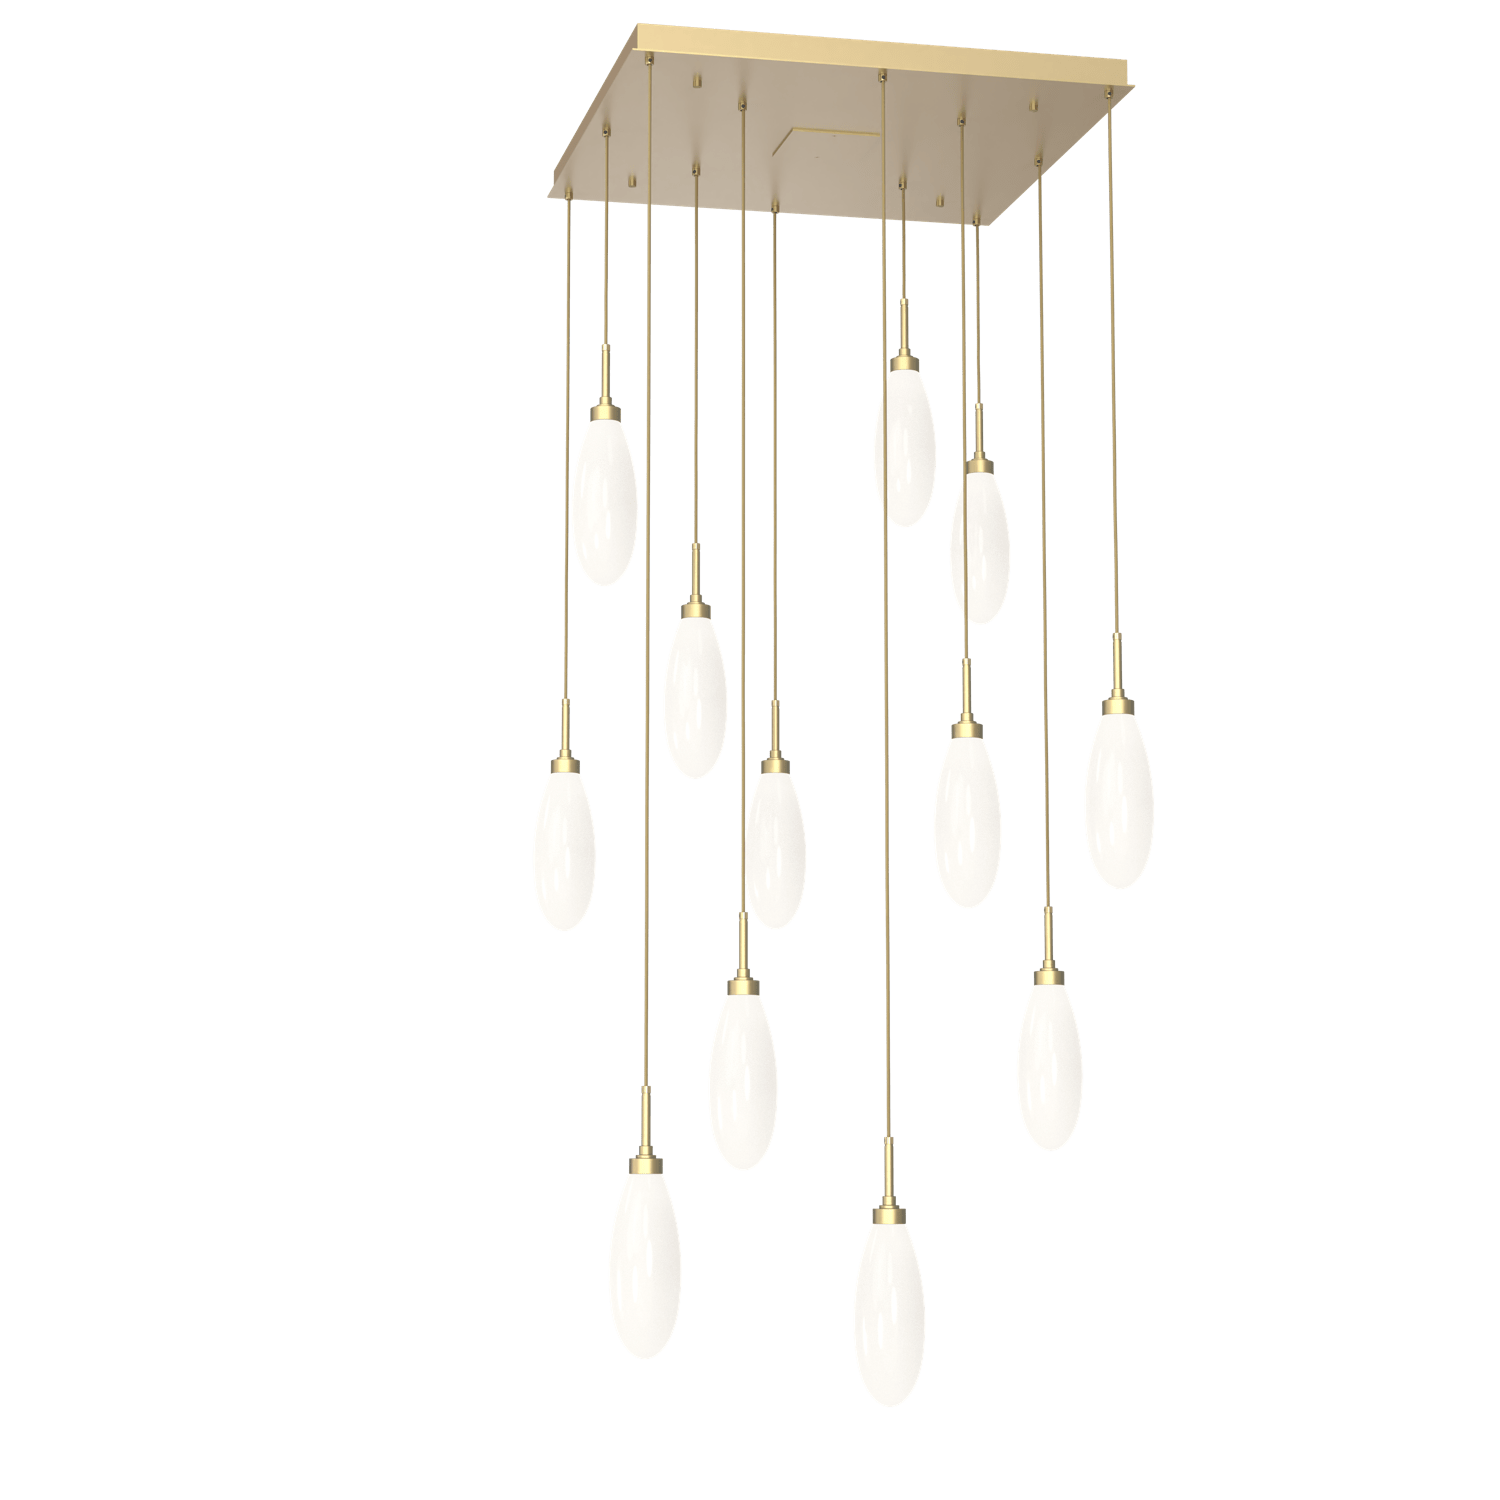 CHB0071-12-GB-WL-LL-Hammerton-Studio-Fiori-12-light-square-pendant-chandelier-with-gilded-brass-finish-and-opal-white-glass-shades-and-LED-lamping